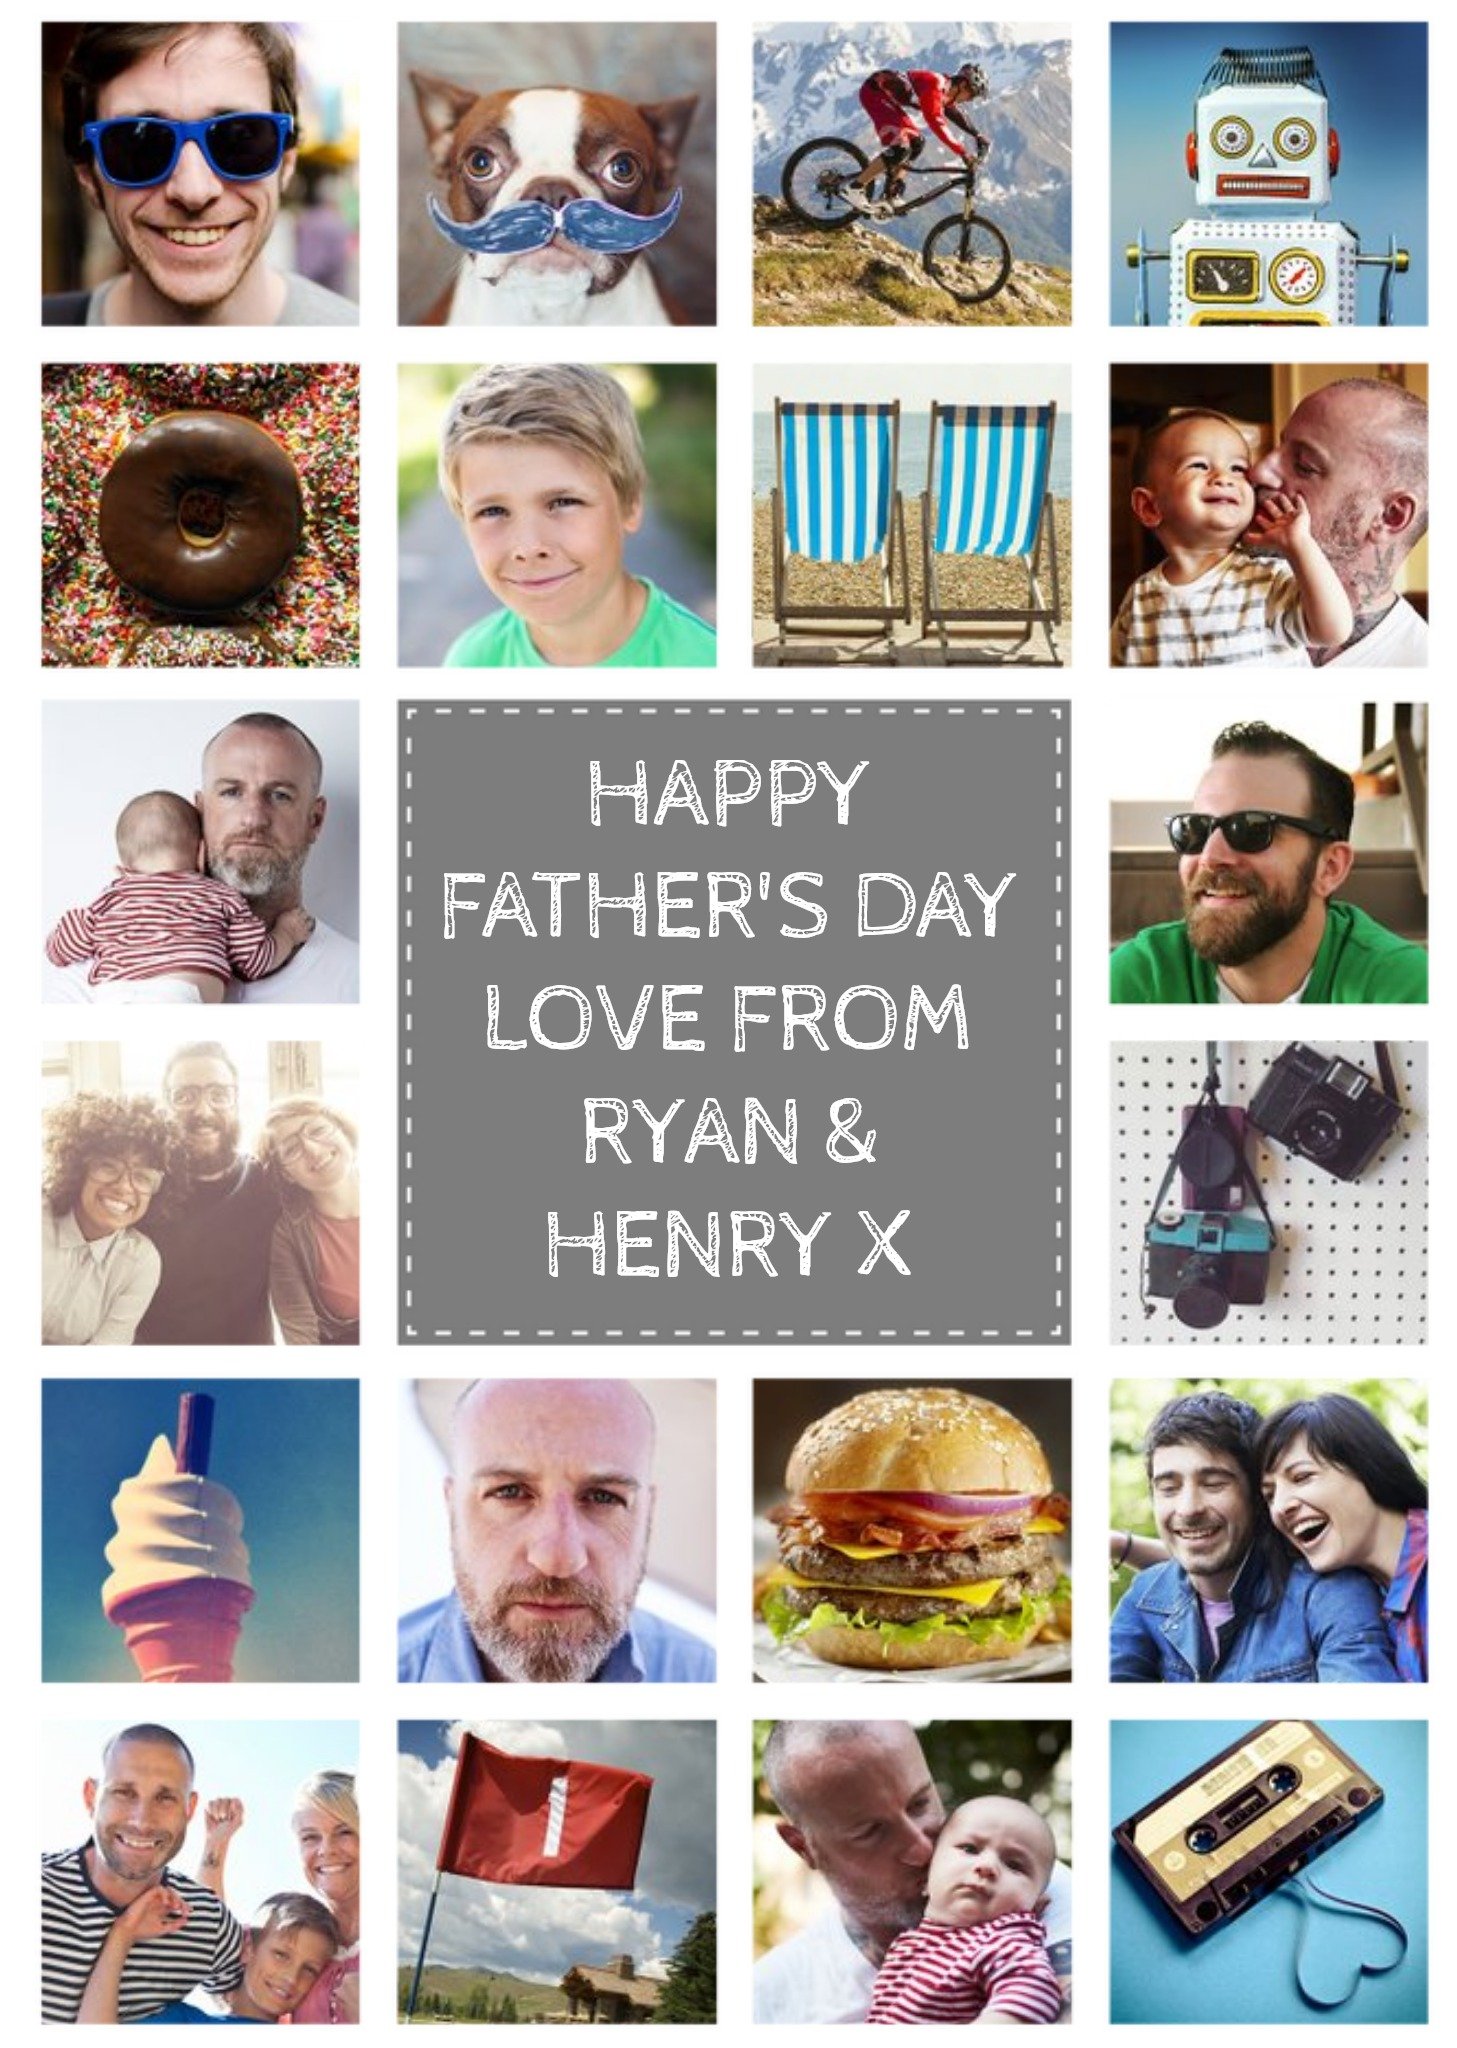 Moonpig Happy Father's Day Twenty Photo Card With Grey Text Box, Large